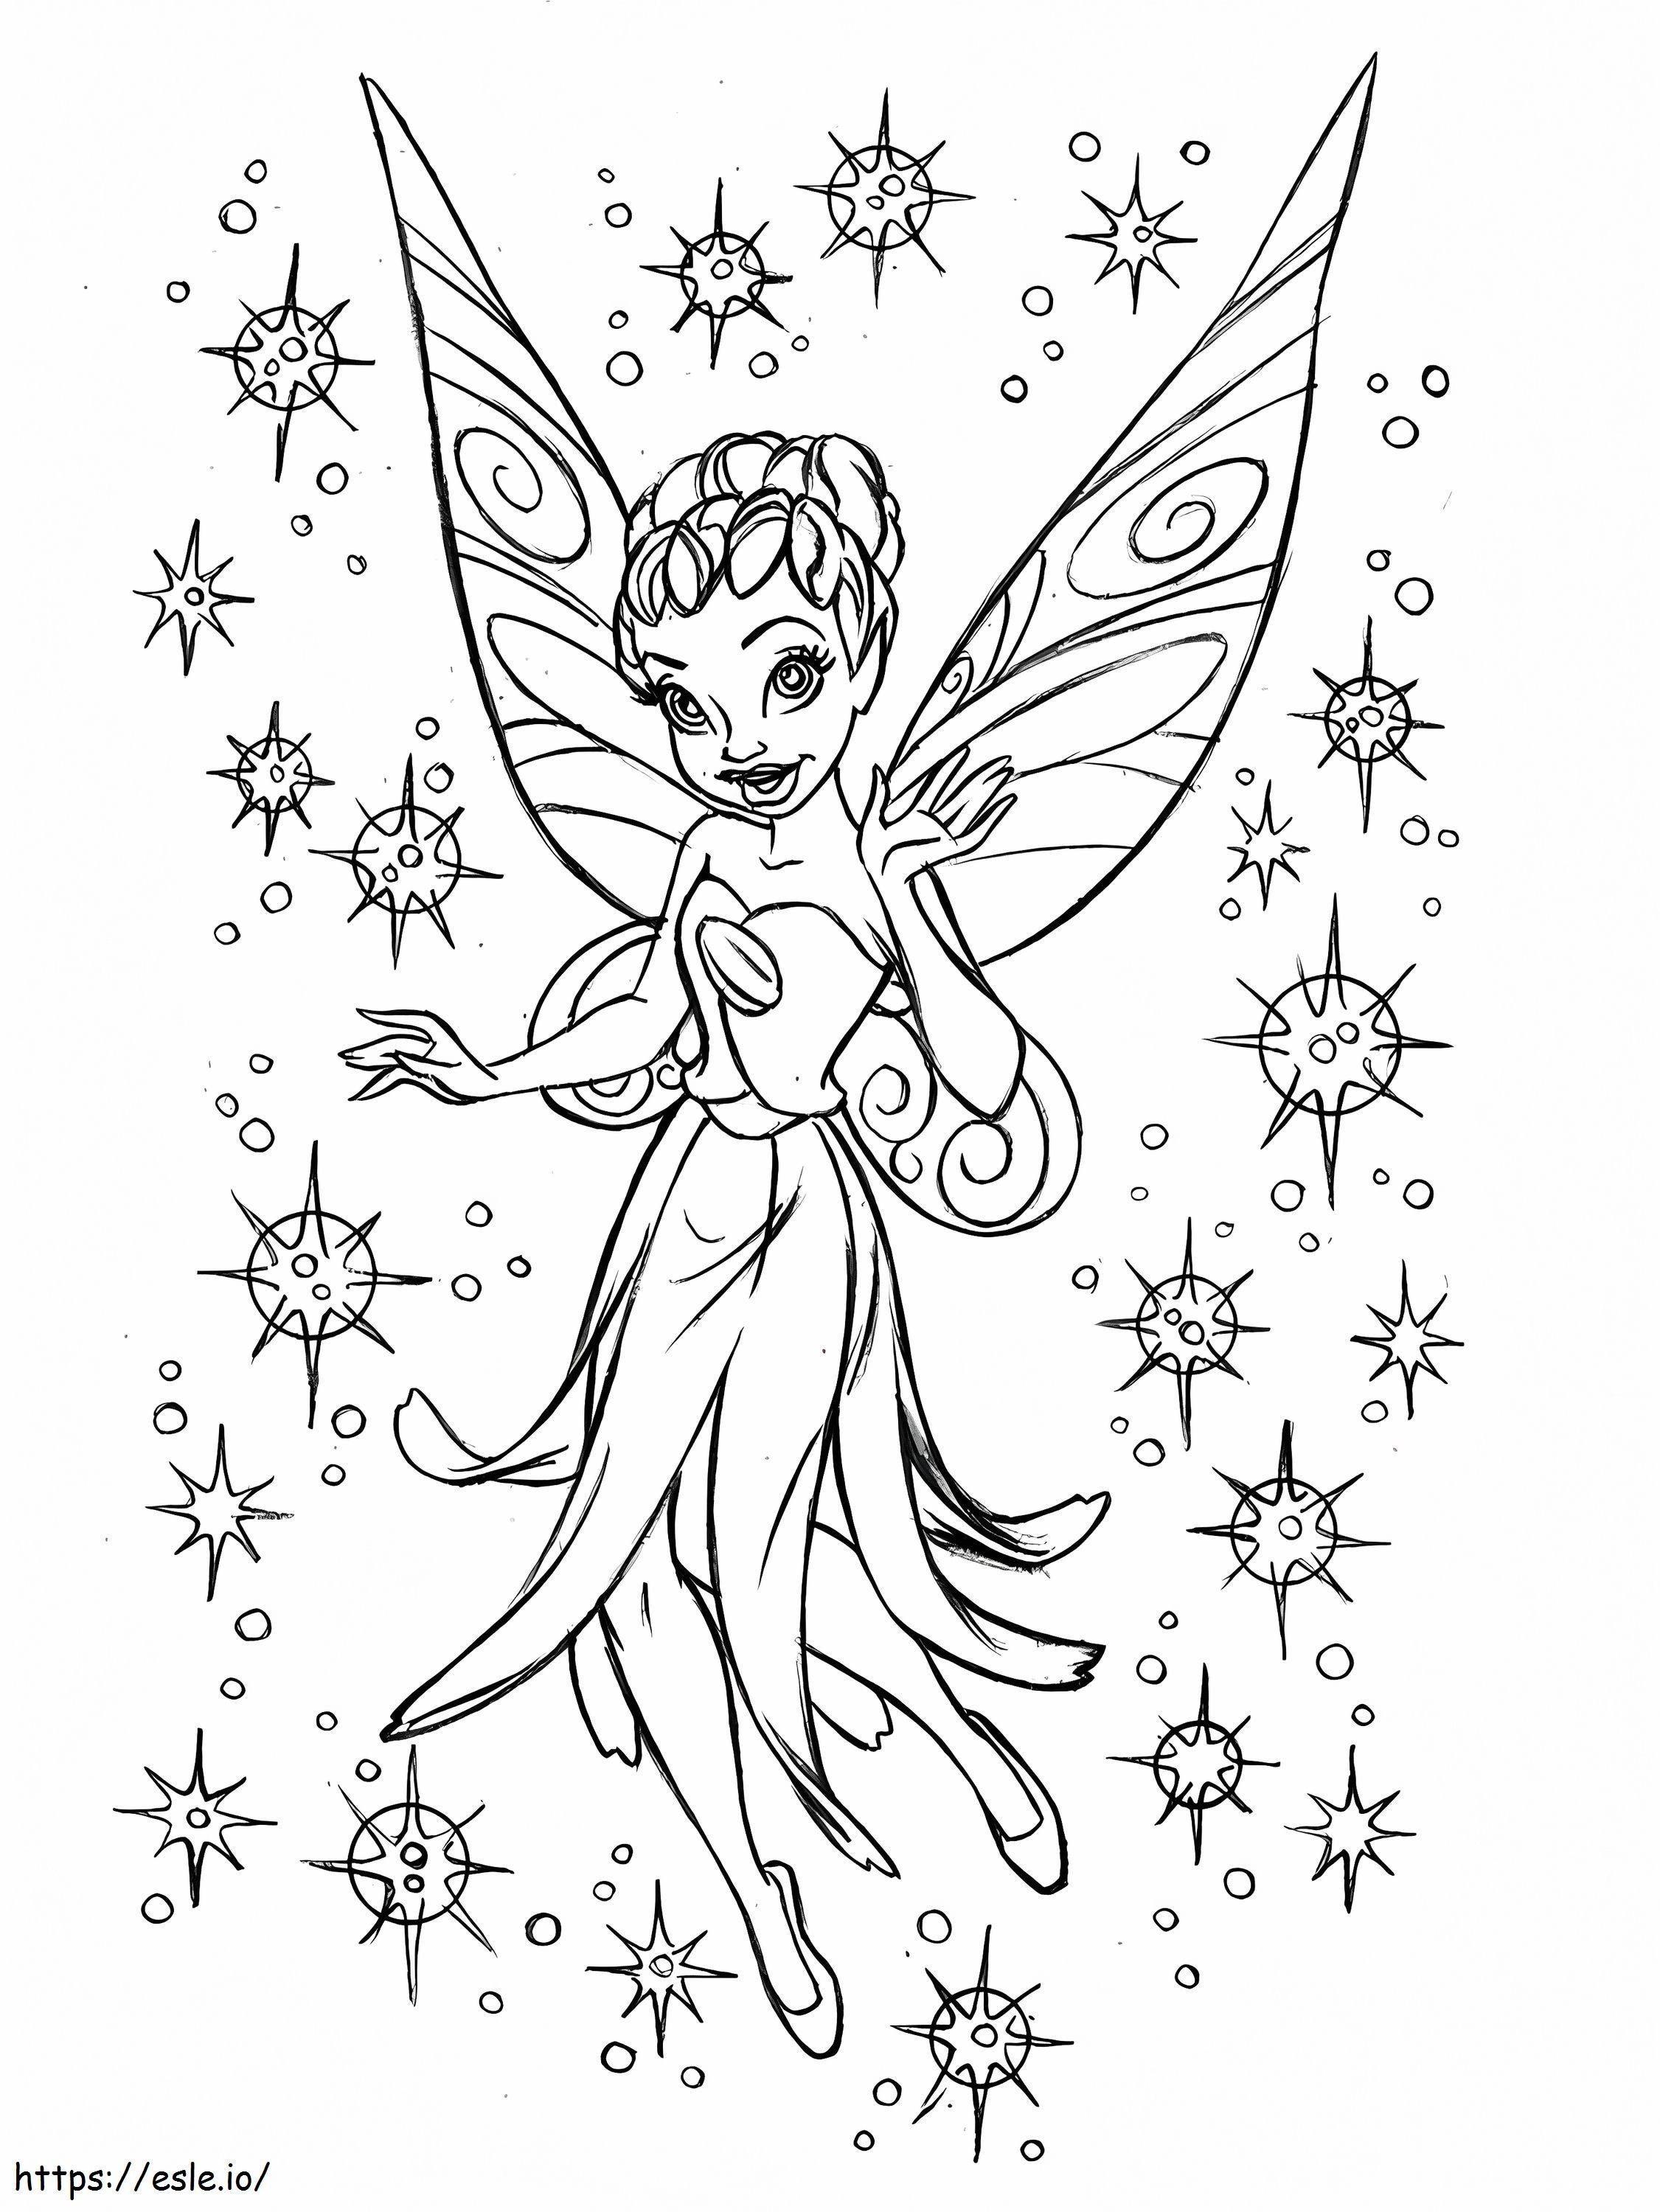 1587456801 Untitled5 coloring page